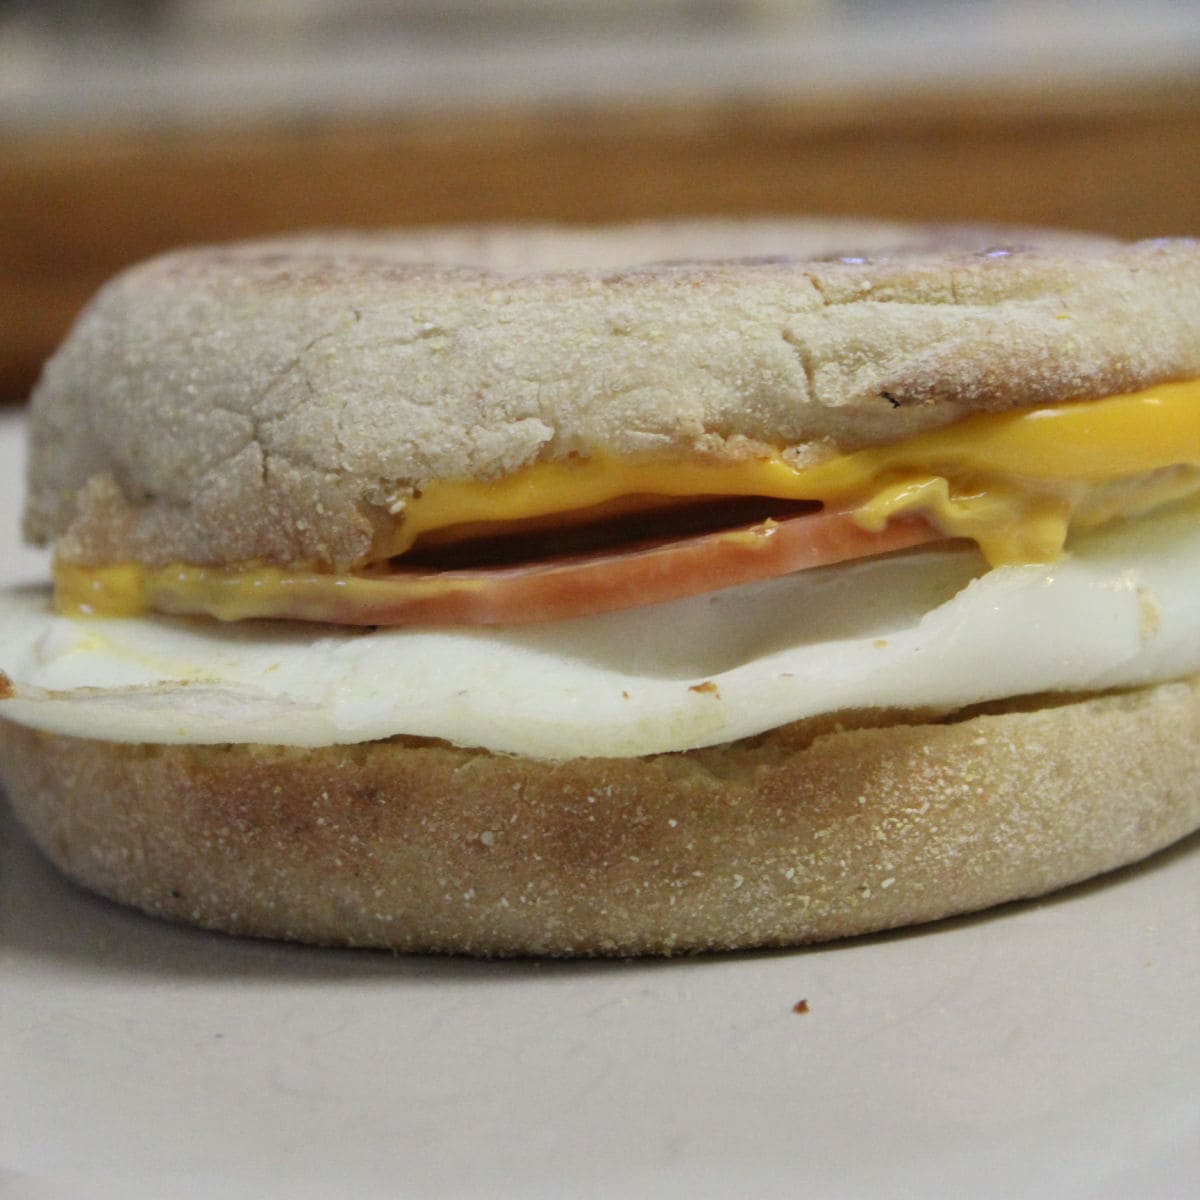 Our Shopping Editor Loves These Egg Rings for Copycat McMuffins